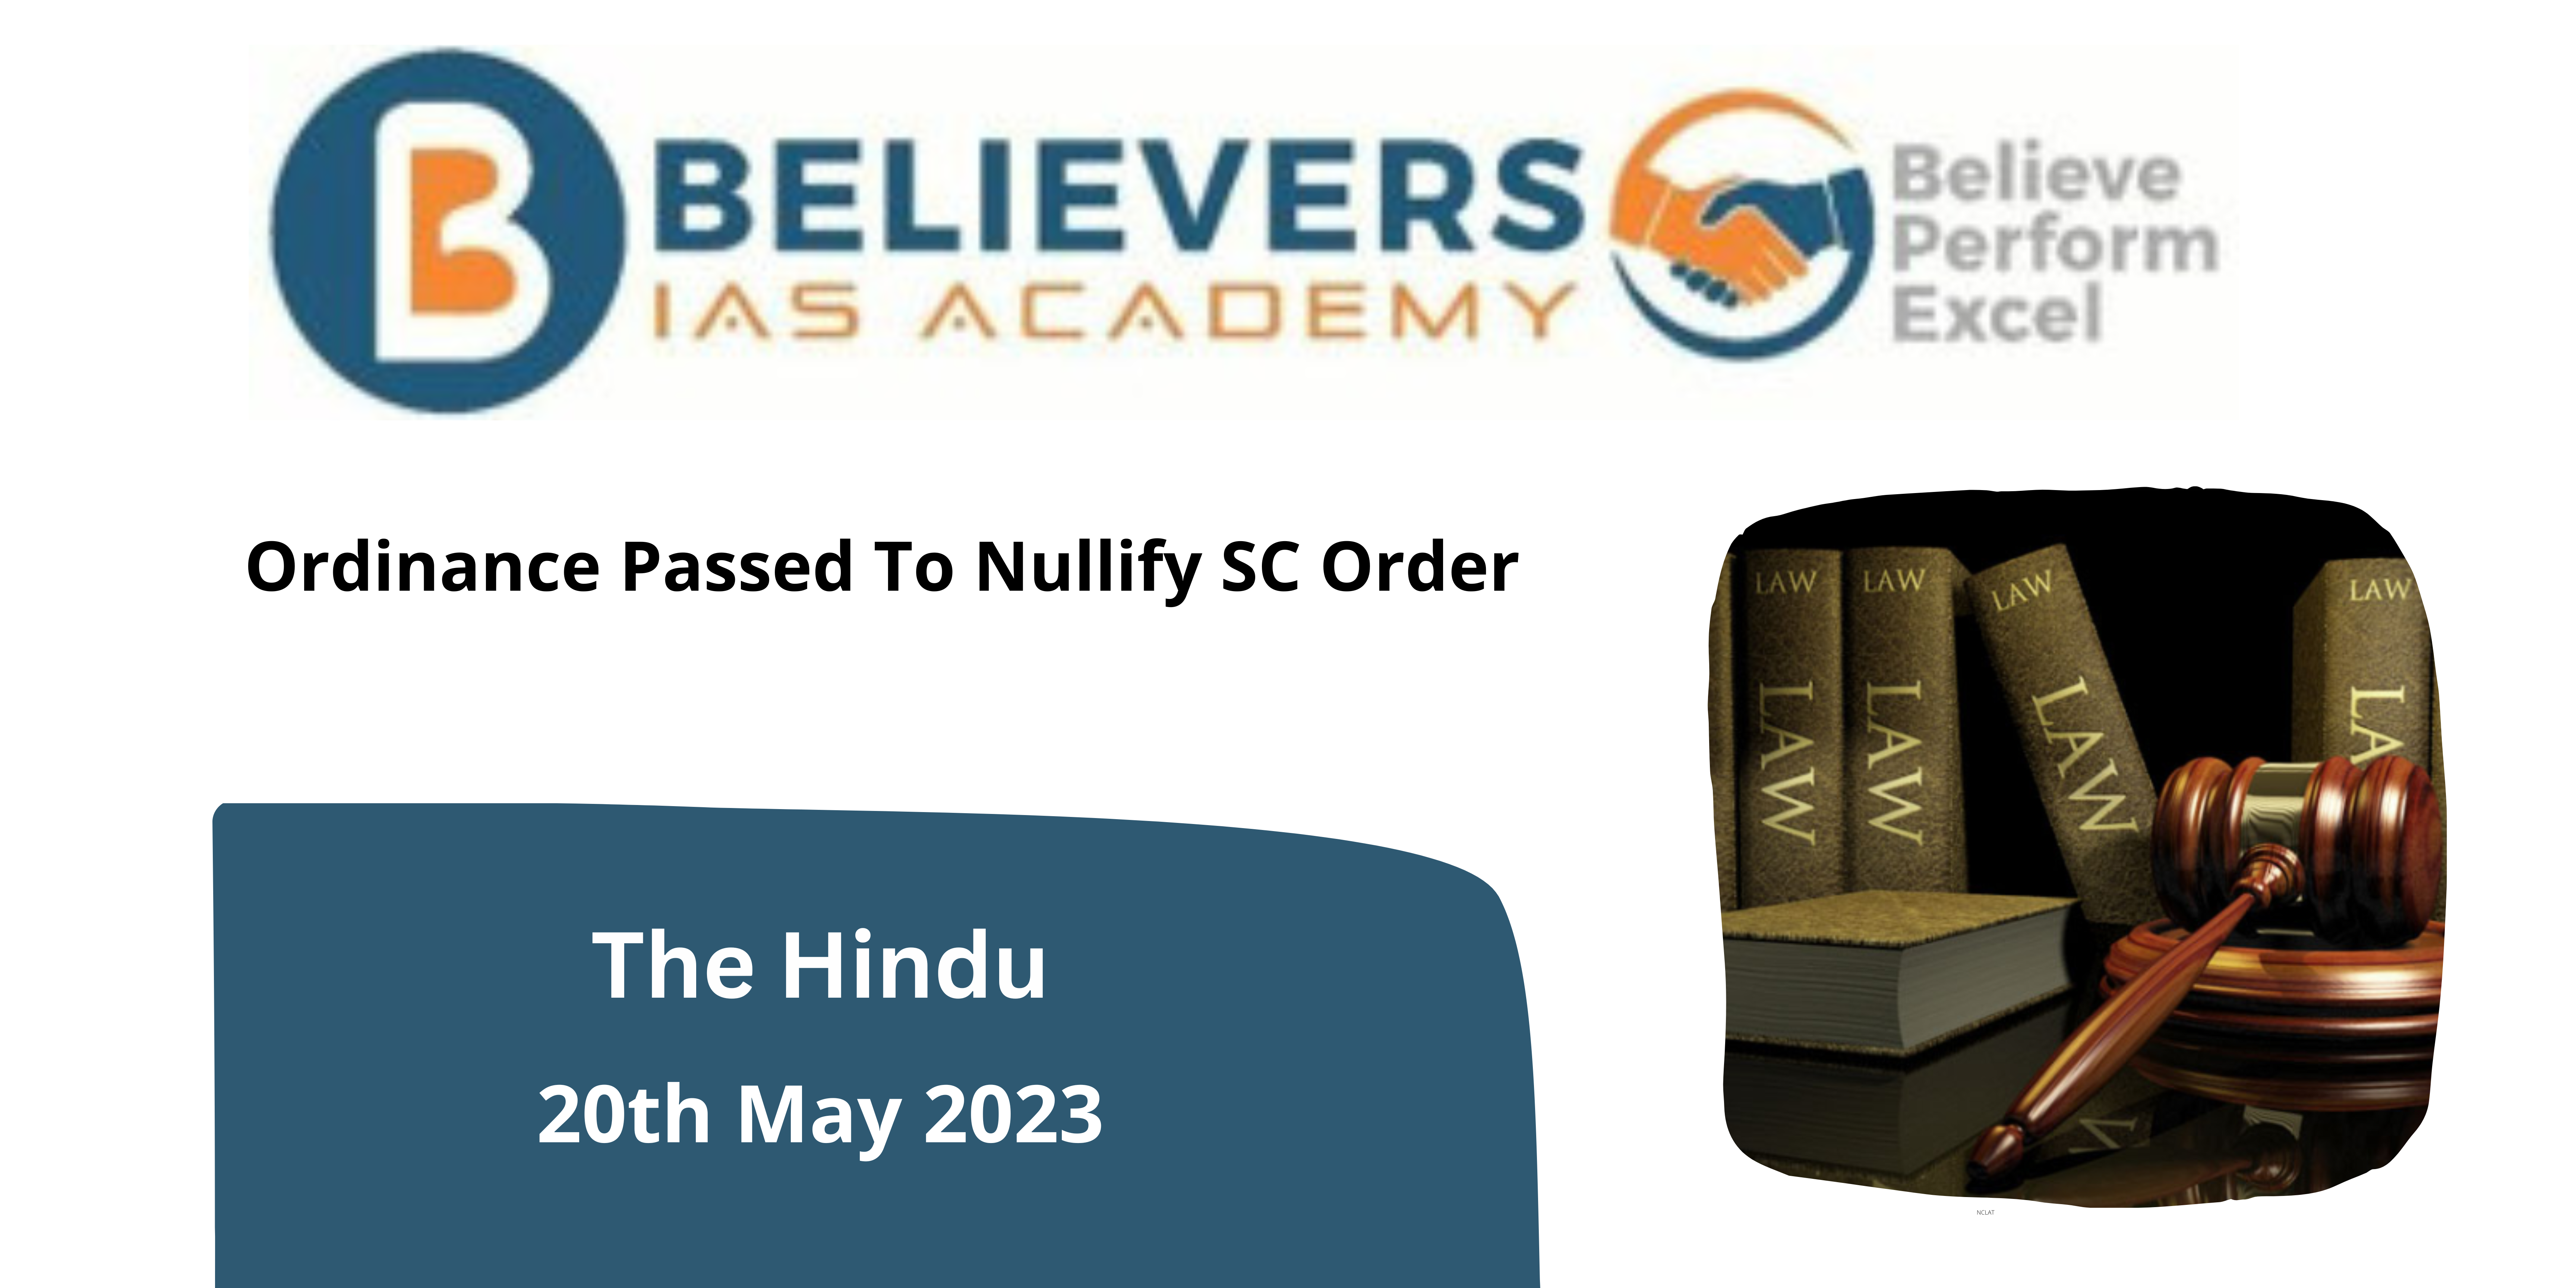 Ordinance Passed To Nullify SC Order